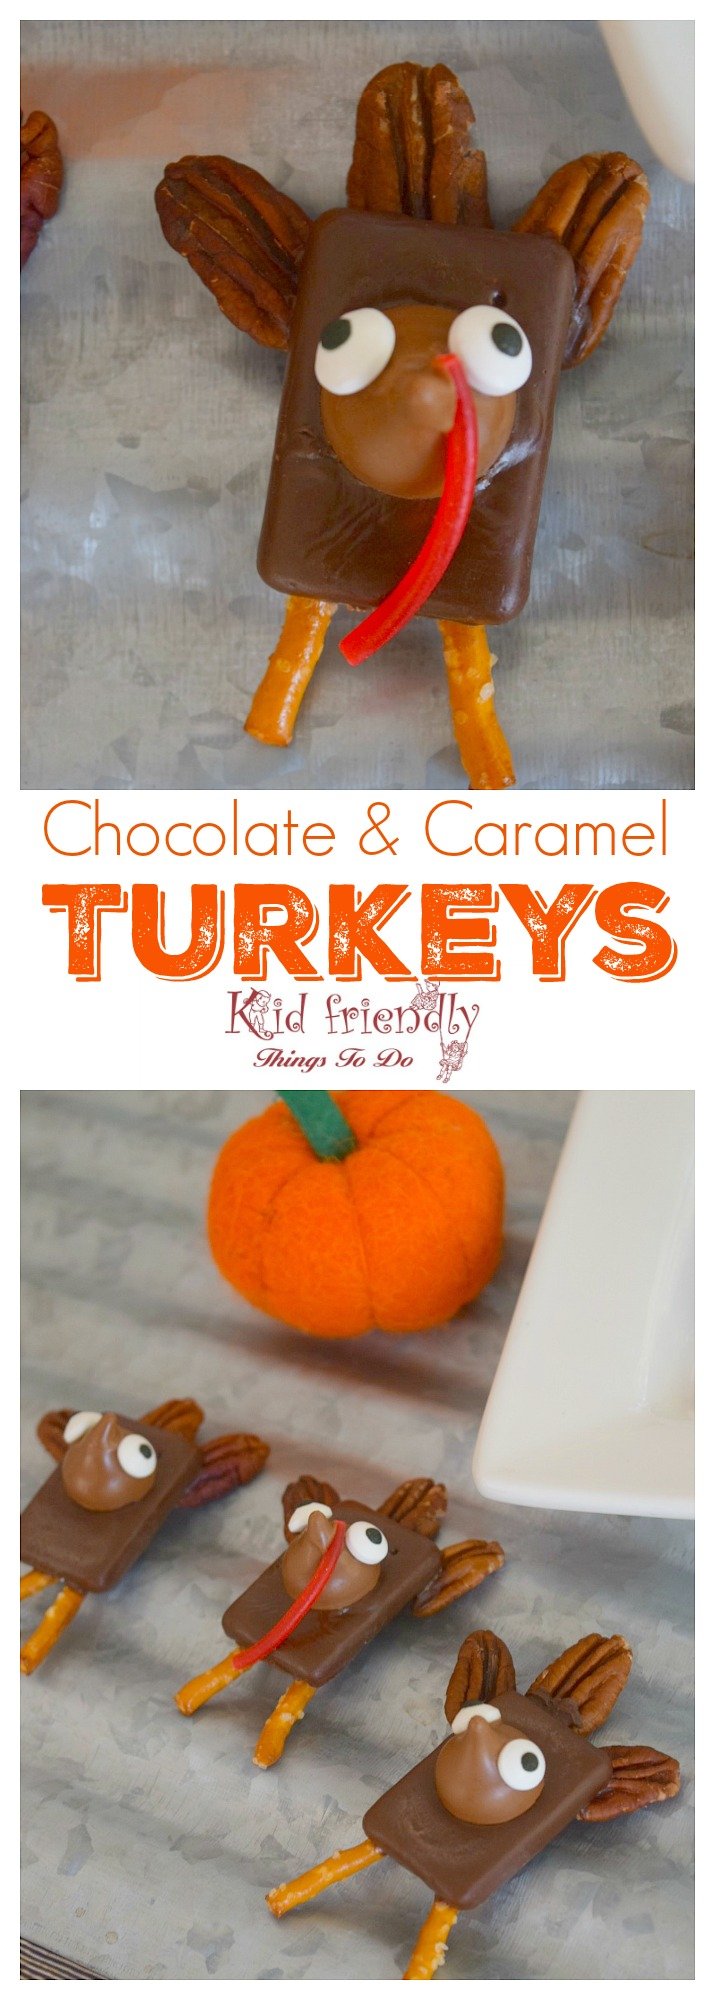 Chocolate & Caramel Turkey Treats for a Thanksgiving With Kids Fun Food - Almost like a turtle! So yummy and easy to make! www.kidfriendlythingstodo.com